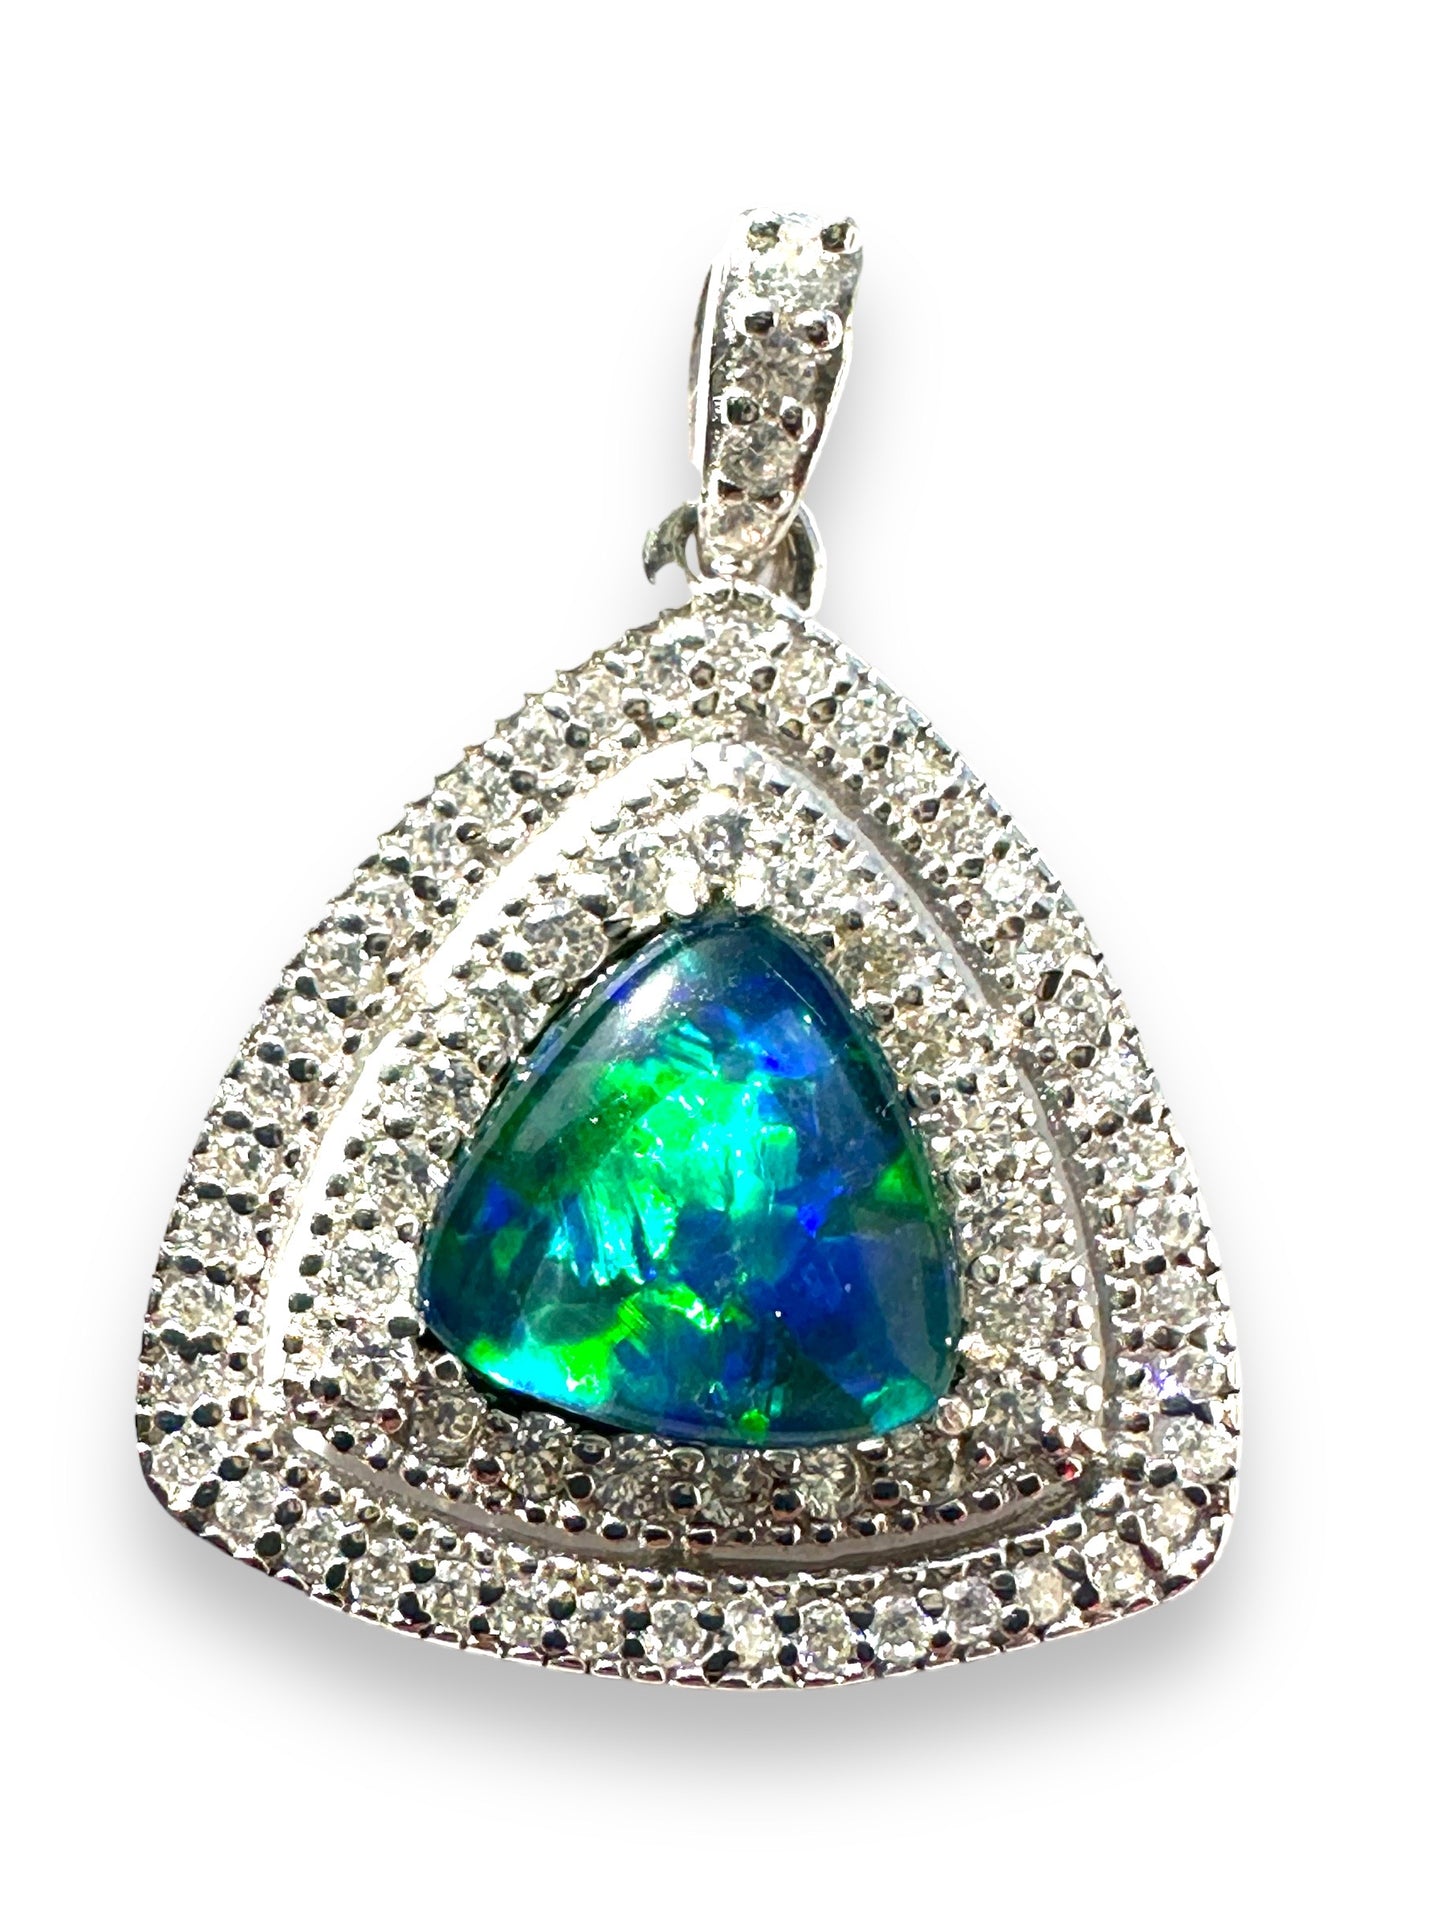 Gorgeous Australian Triplet Opal and Sterling Silver Pendant.